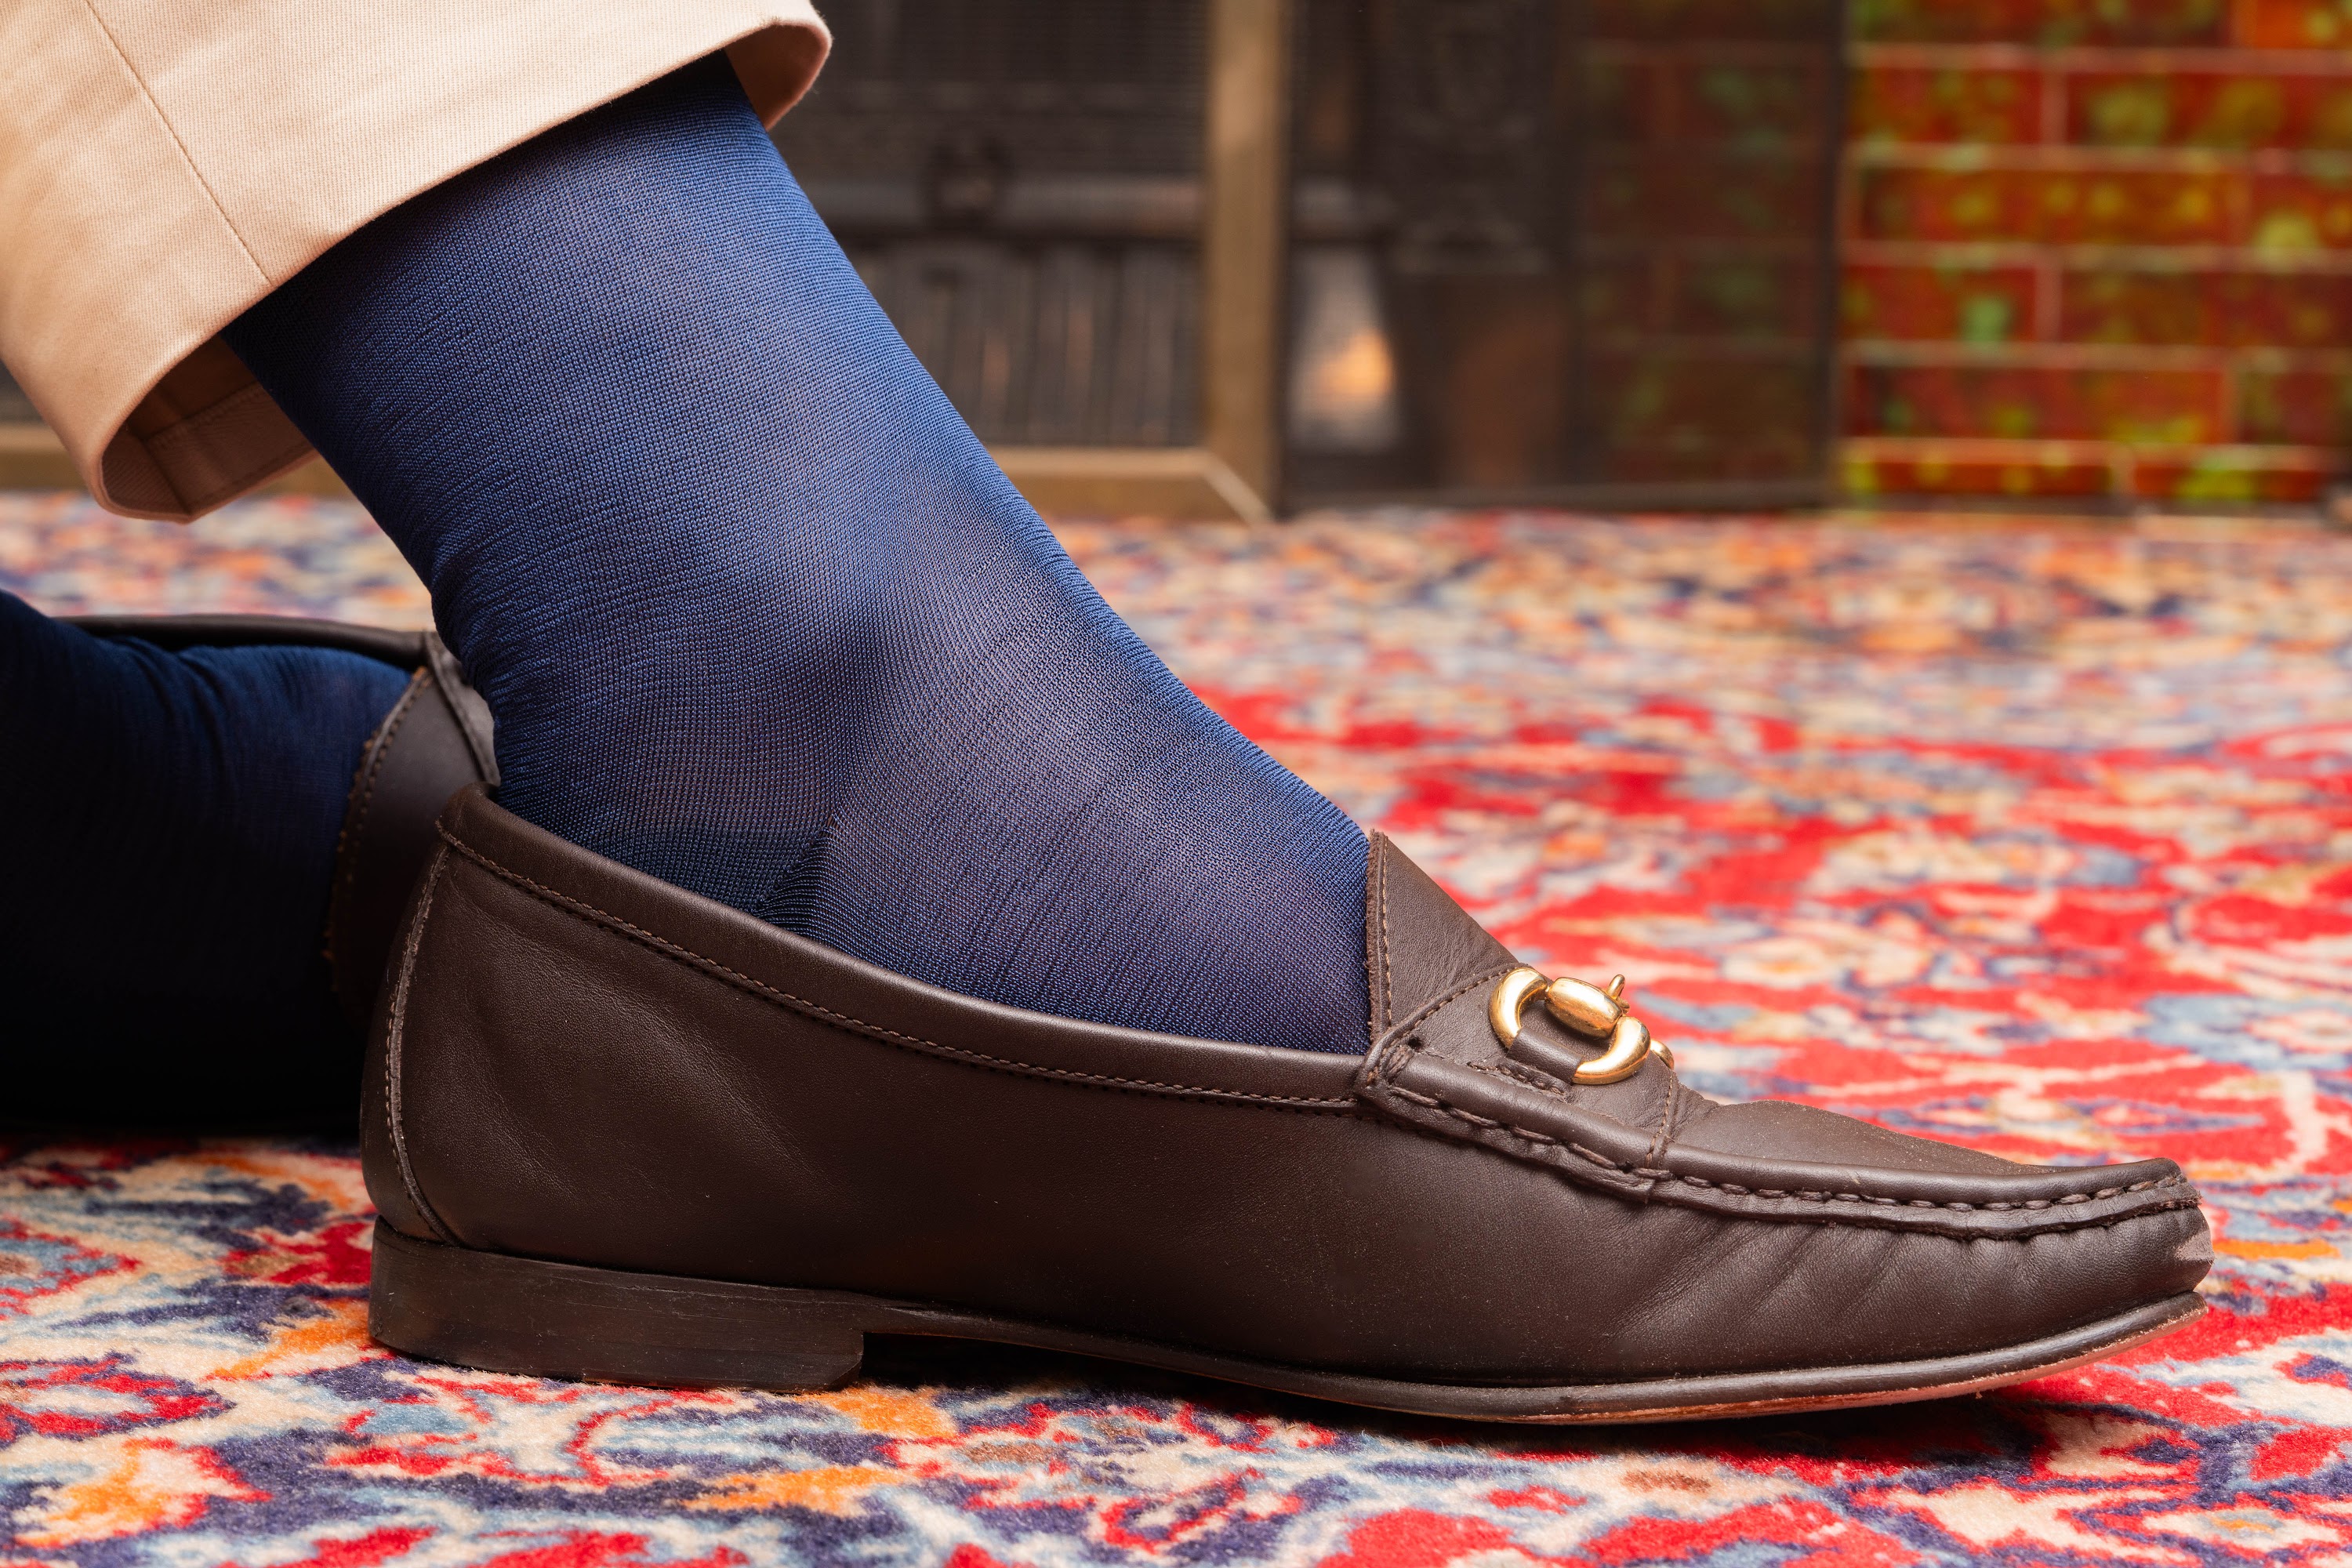 Chocolate Brown Gucci Loafers with light navy silk socks by Fort Belvedere